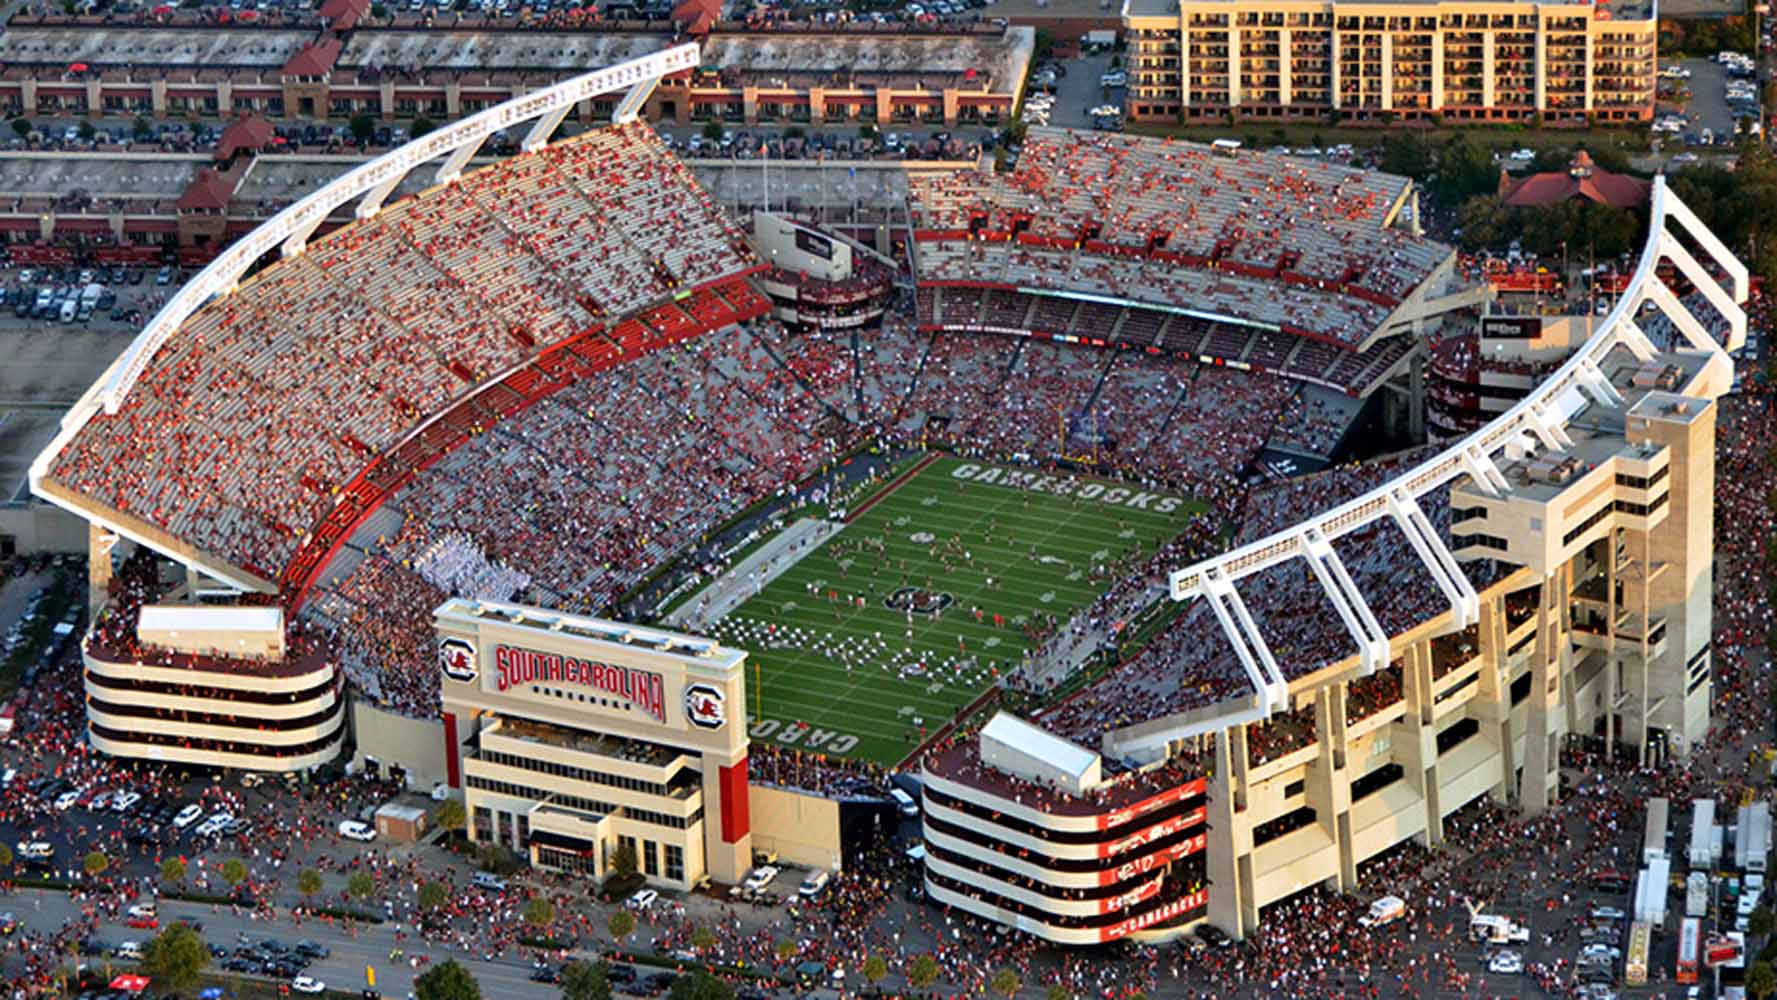 College Sports Stadium Corporate Naming Rights | Sports Law